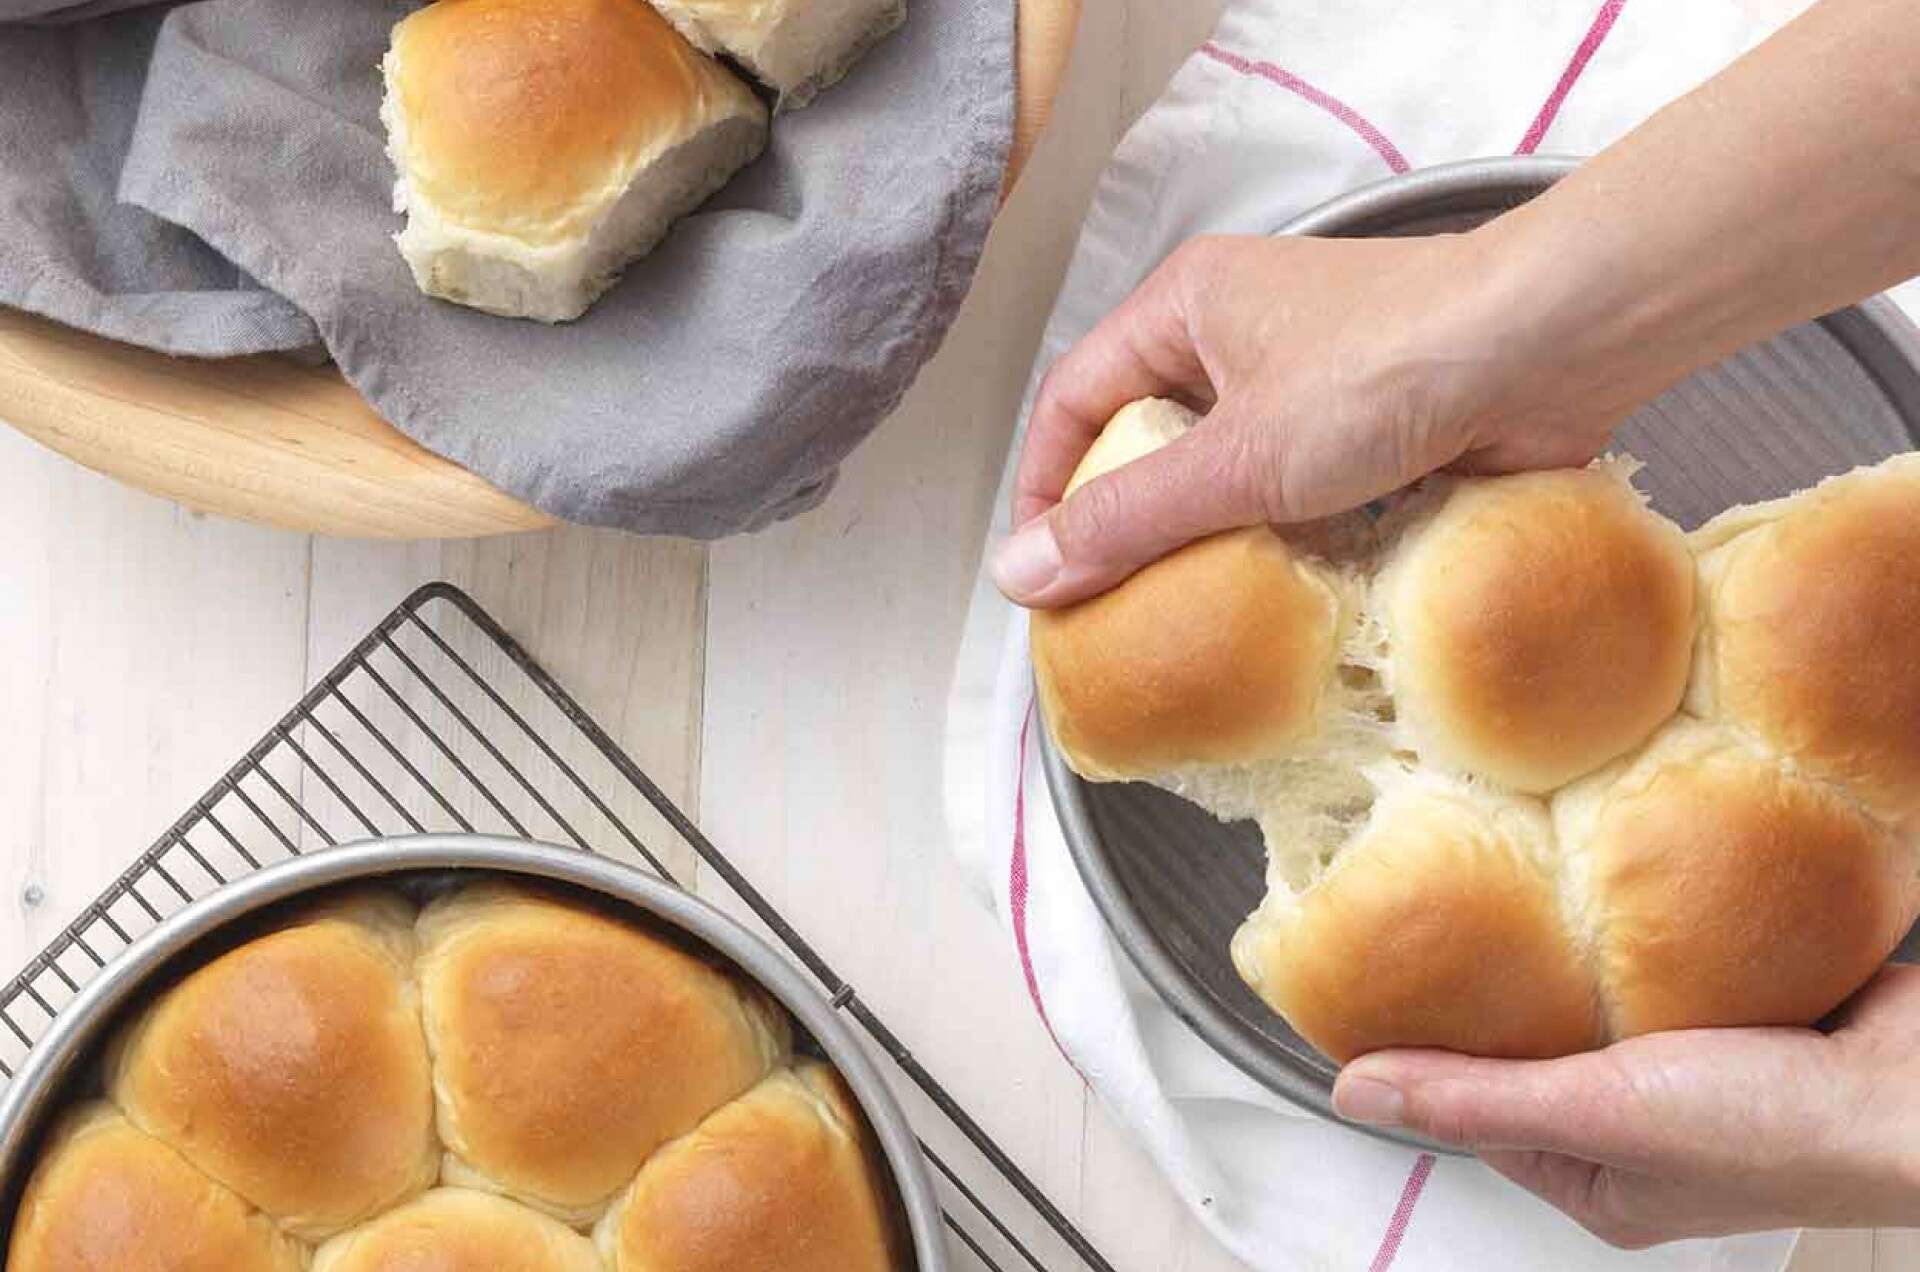 Hands pulling apart Golden Pull-Apart Buns from the pan